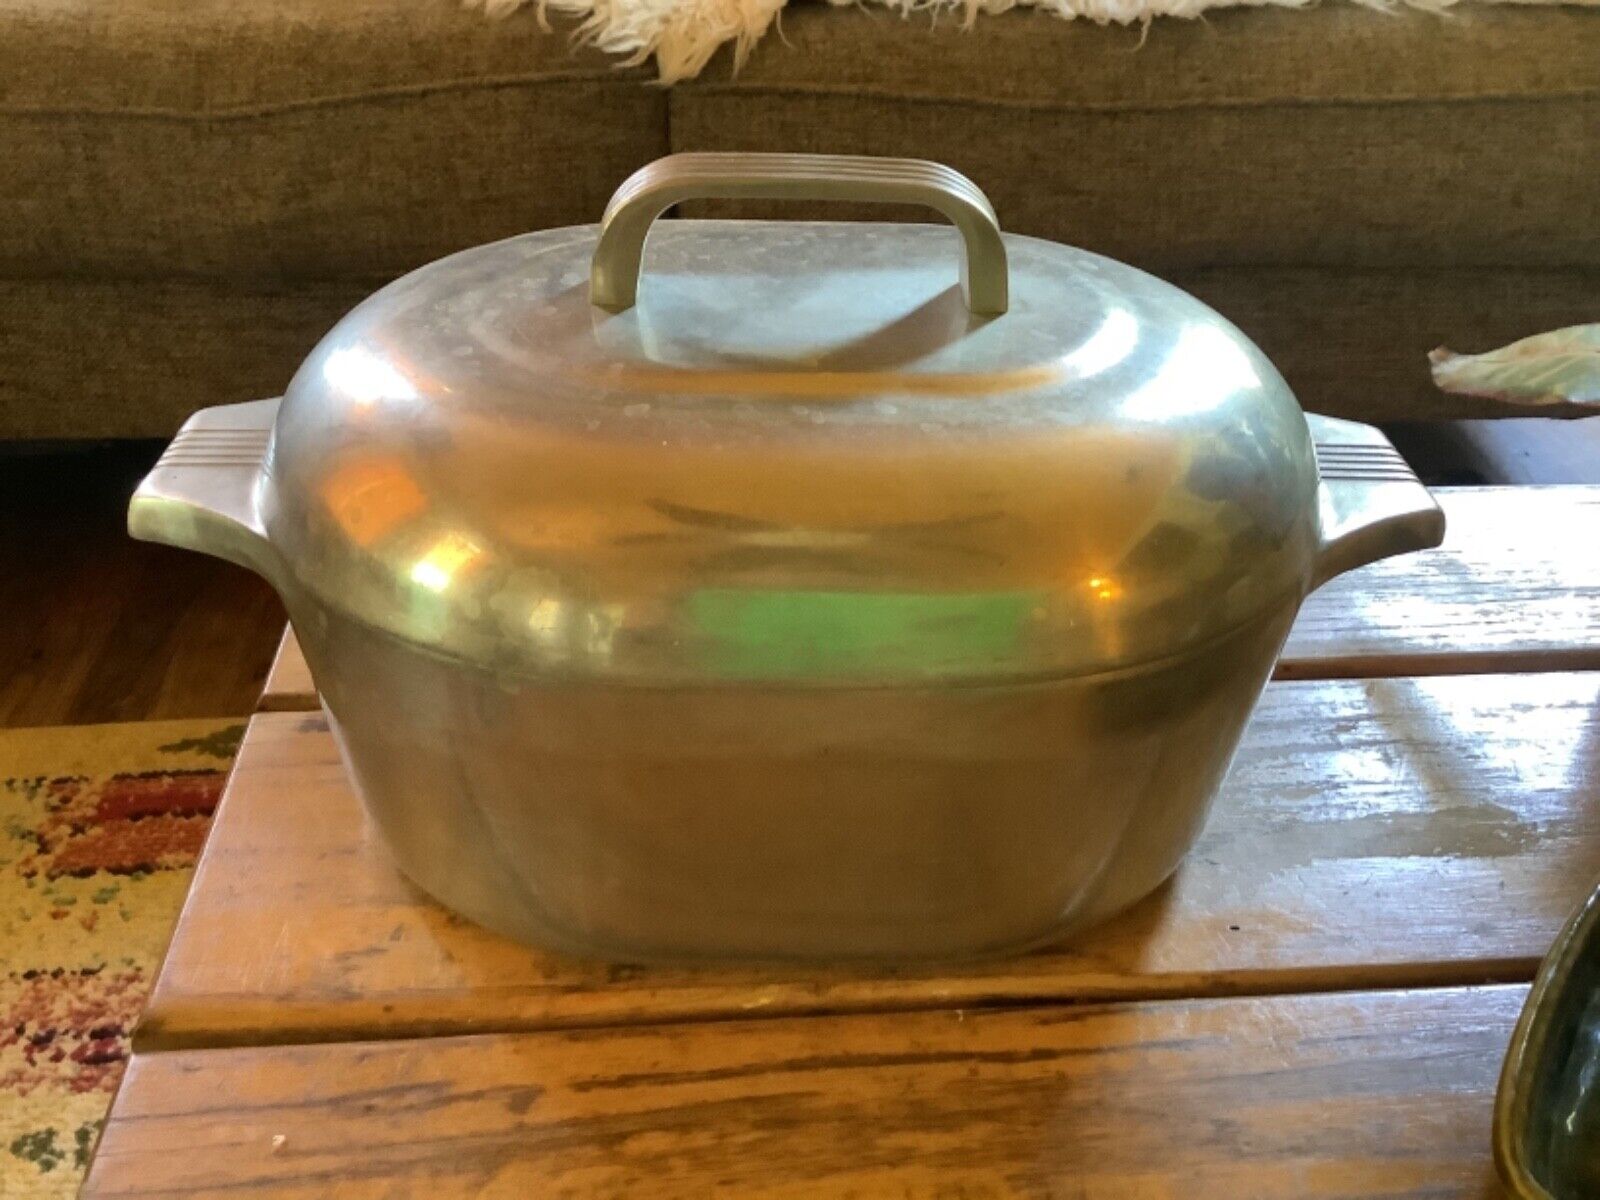 GHC Wagner Ware 13 QT Magnalite Oval Roaster Pot With Box 4267, Sidney  Aluminum Roaster Large Roasting Pan Dutch Oven Vintage Cookware USA 